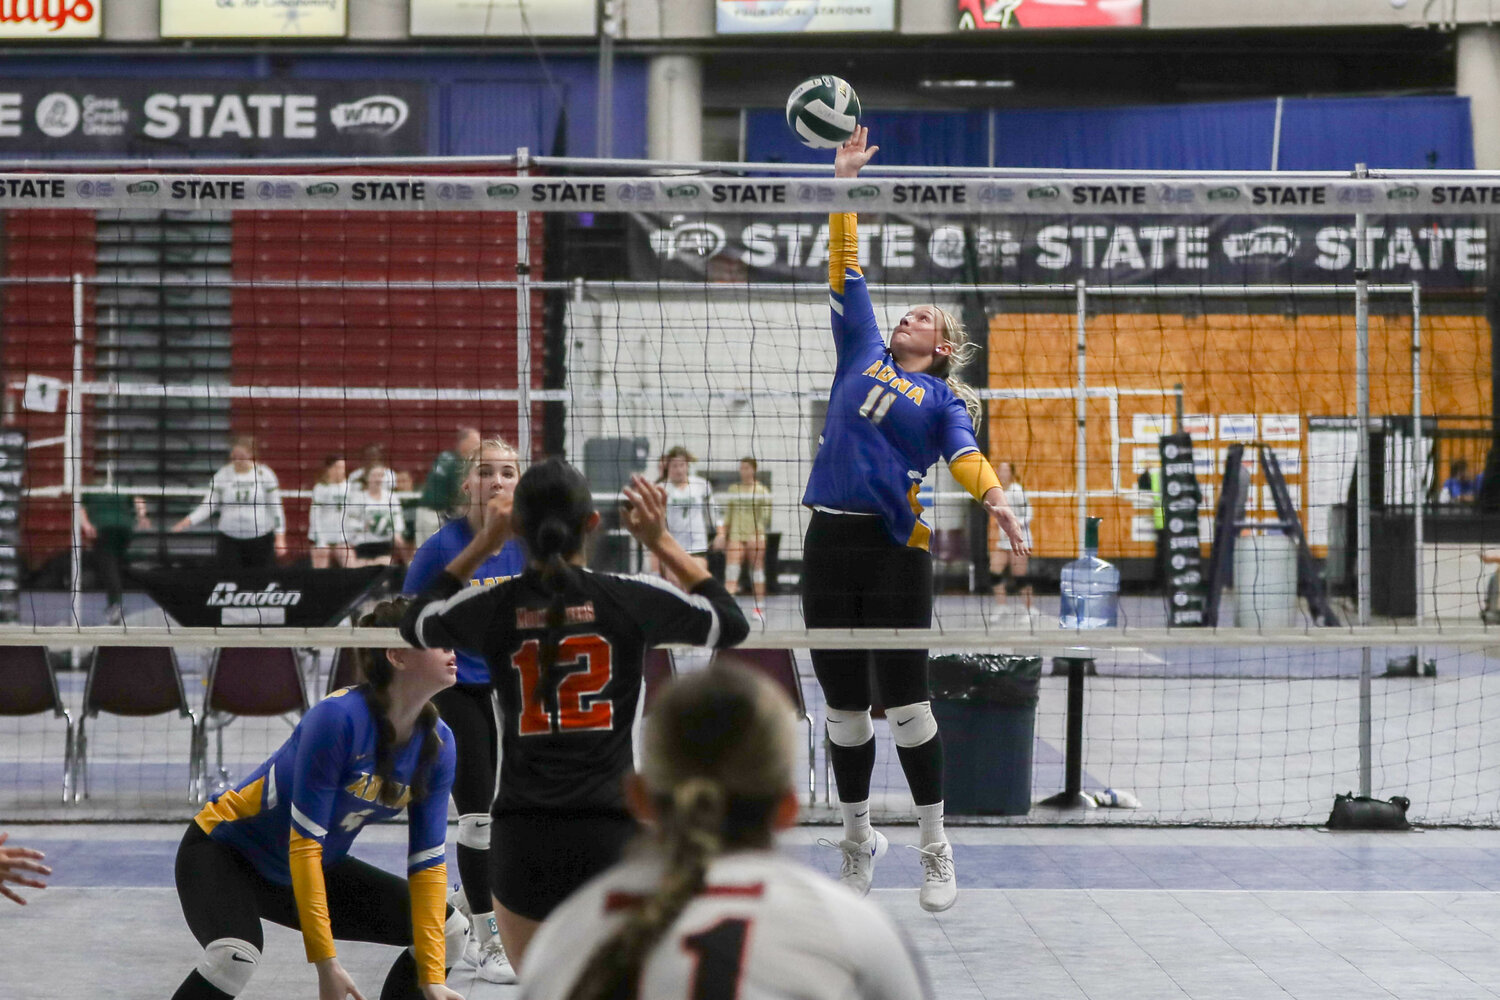 Kendall Humphrey bats the ball over the net during Adna's match with Rainier in the state quarterfinals on Nov. 8 in Yakima.